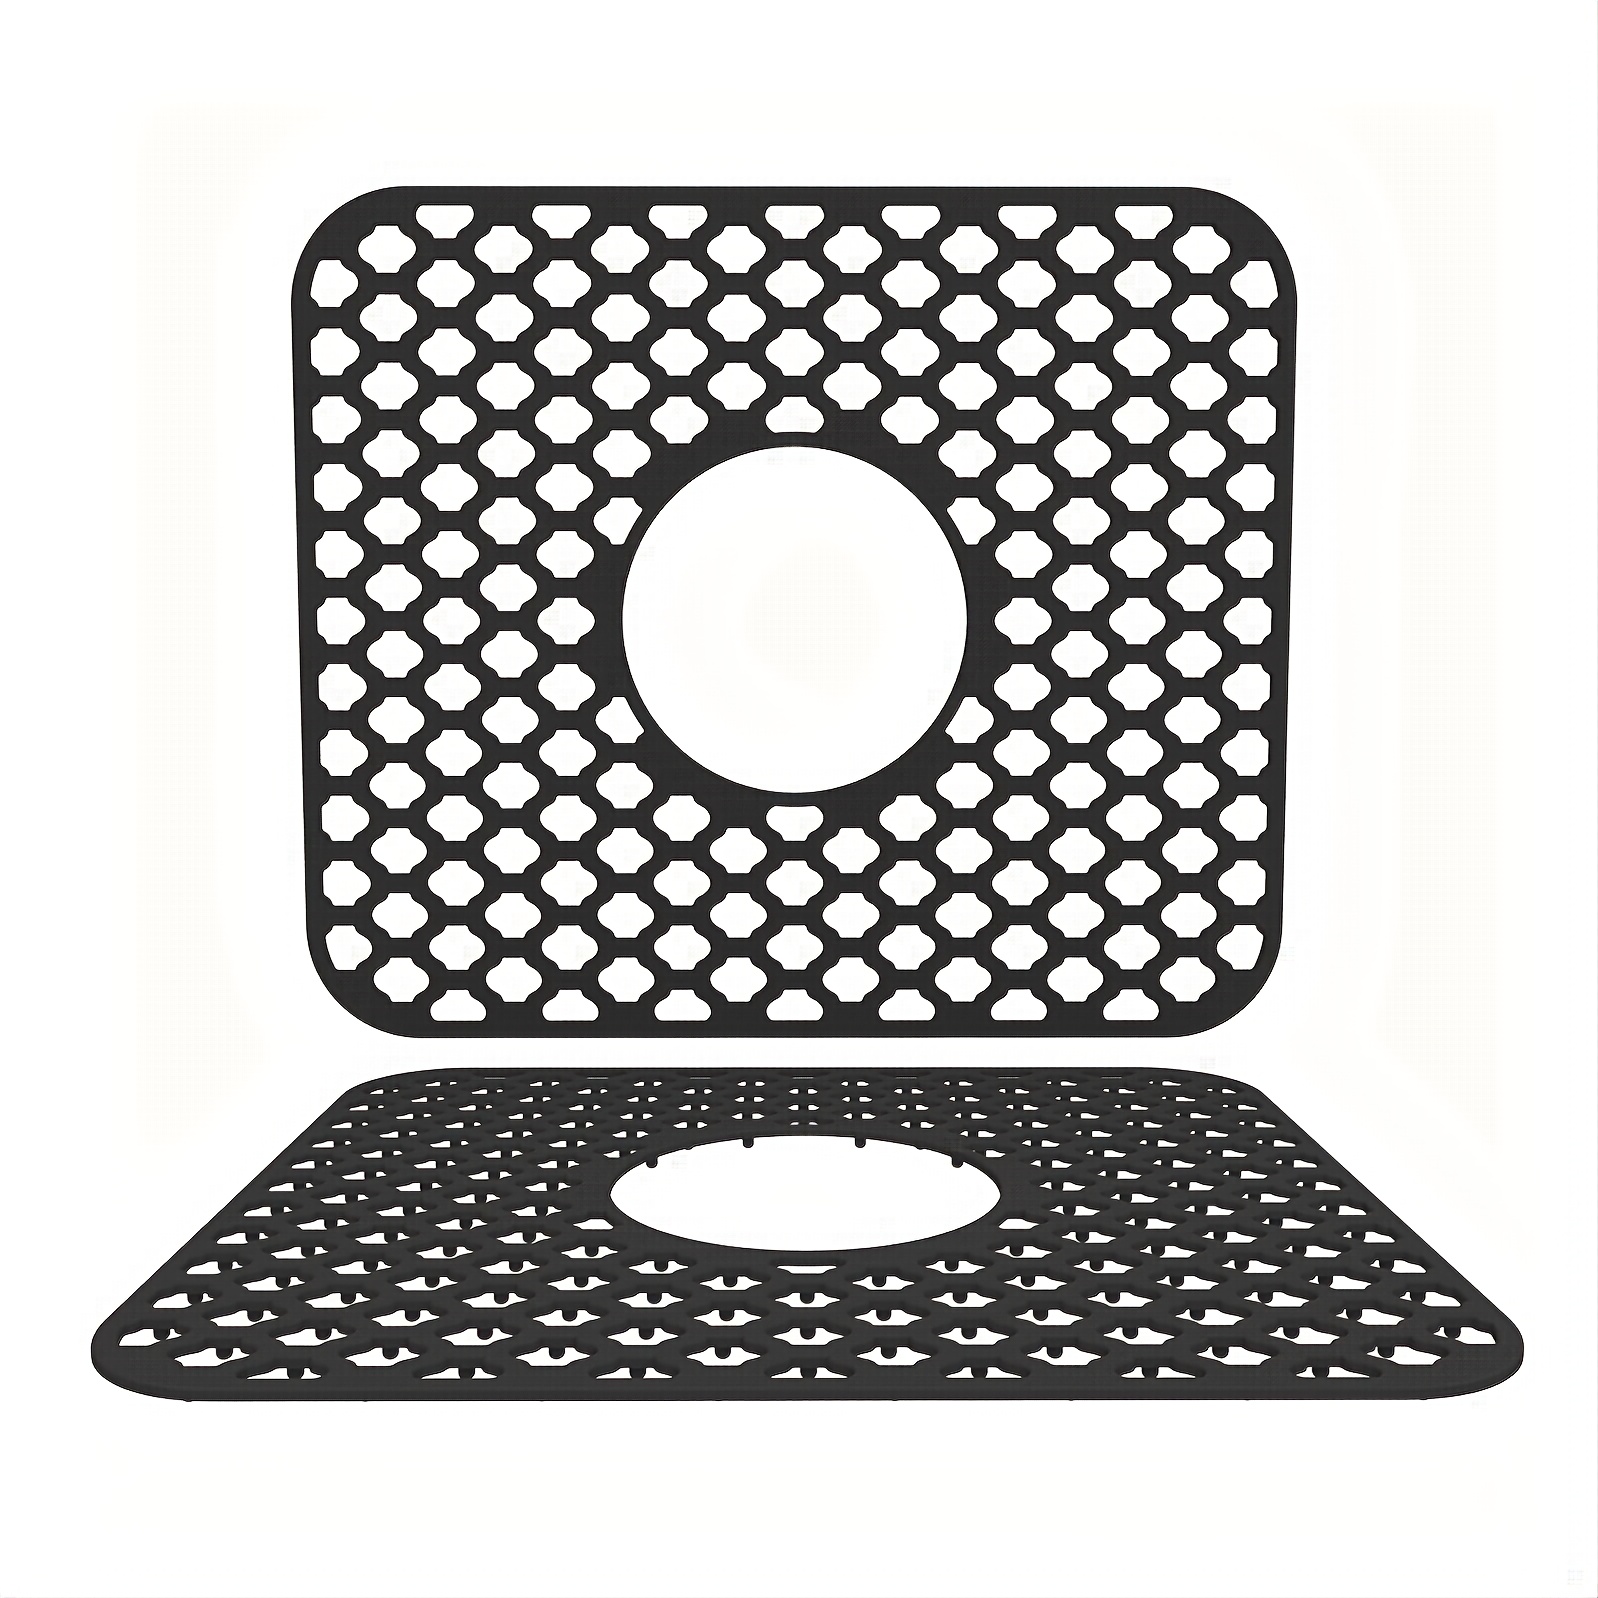  JUSTOGO Sink Protectors for Kitchen Sink,Silicone Sink Mat Grid  Accessory 26 x 13 ,1 PCS Non-slip Grey Sink Mats for Bottom of Kitchen  Farmhouse Stainless Steel Porcelain Sink : Tools 